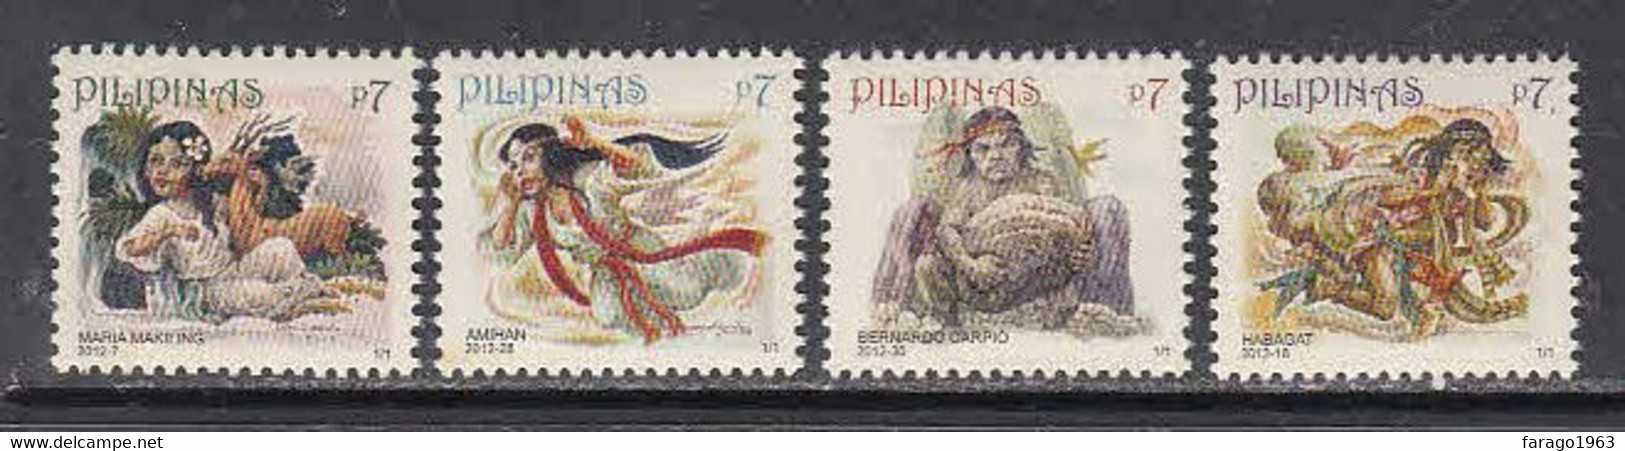 2012 Philippines Weather Gods Earthquakes Complete Set Of 4  MNH - Filipinas